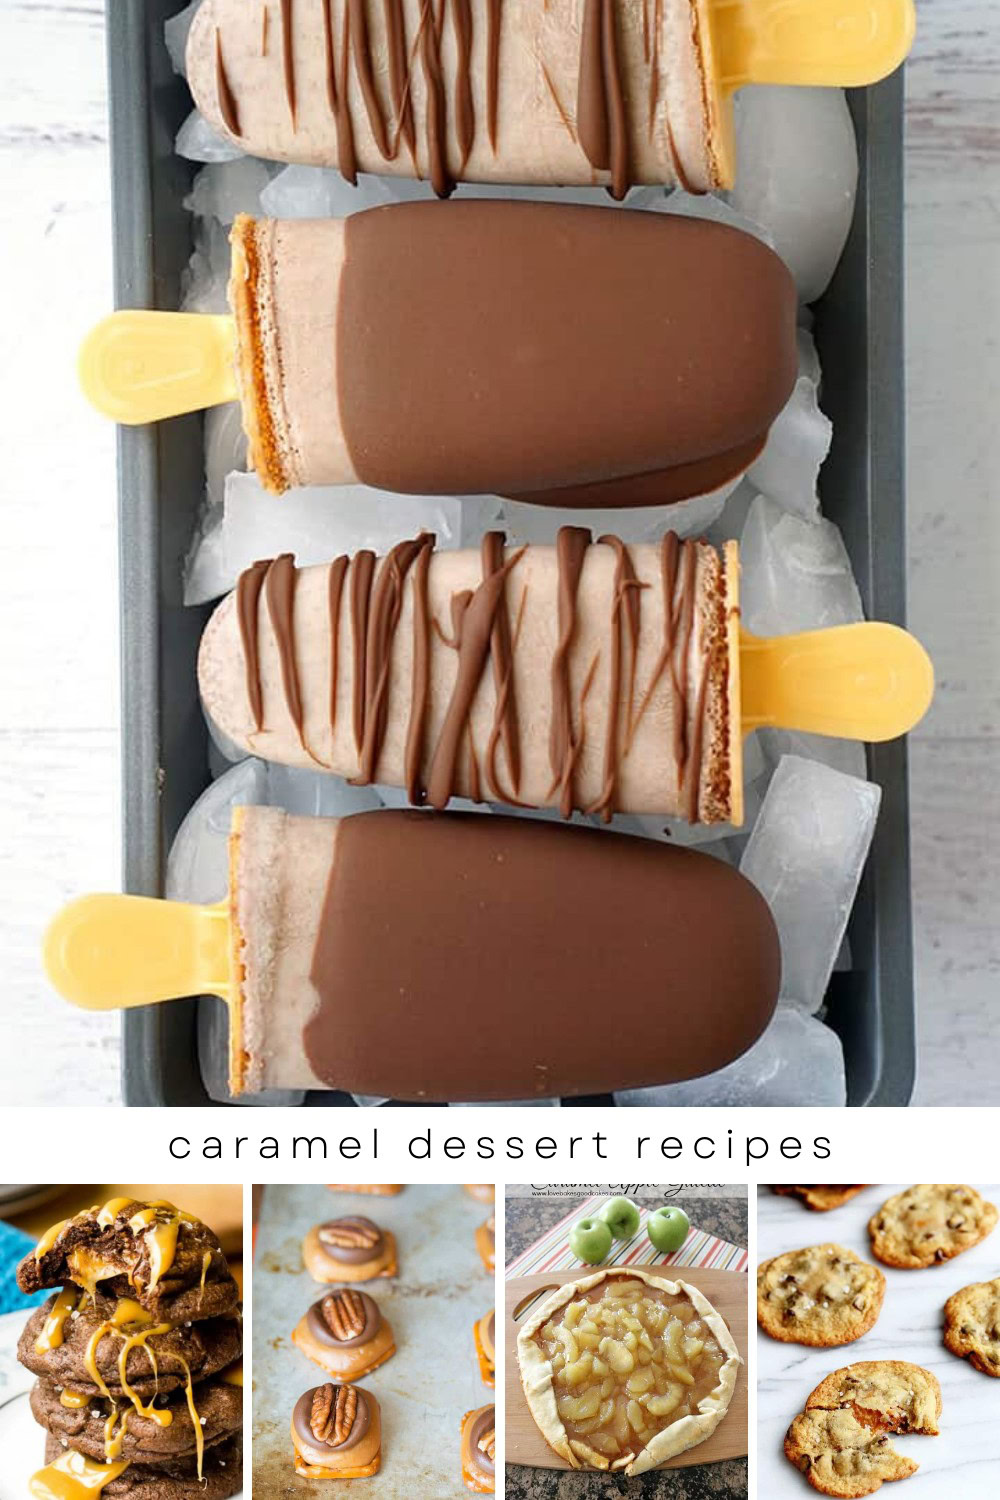 These delicious caramel dessert recipes are sure to put a smile on your face, even at the end of a bad day! Indulge in sweet, gooey delights that will lift your spirits instantly. 🍰🍮 #CaramelLovers #SweetEscape

